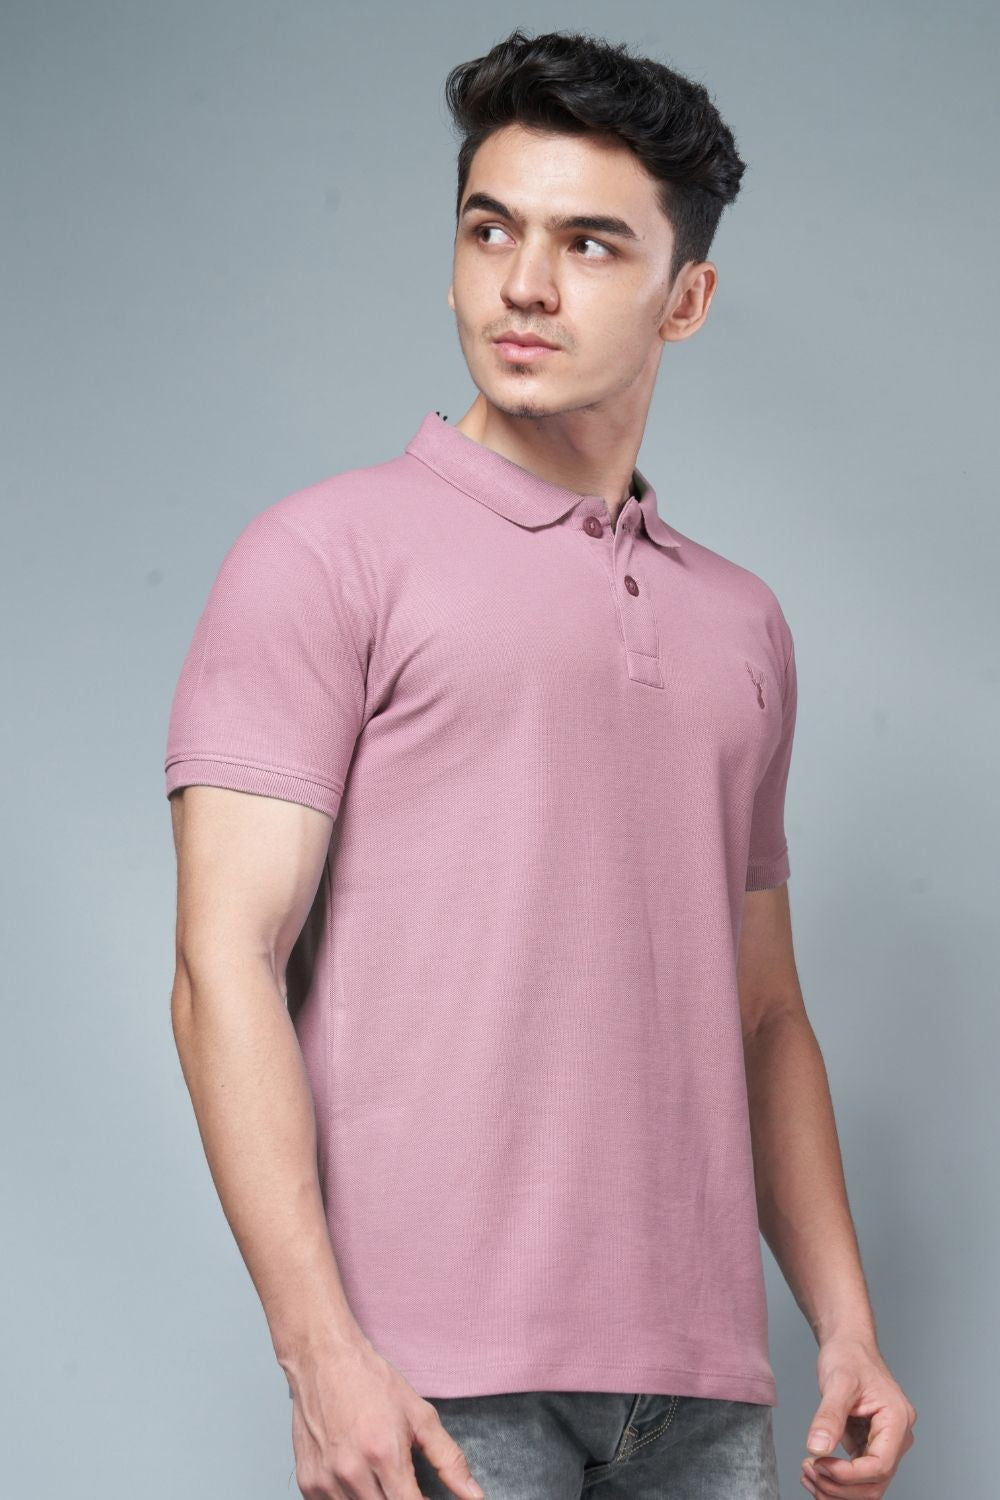 Salmon Pink colored, identity Polo T-shirts for men with collar and half sleeves, side view.